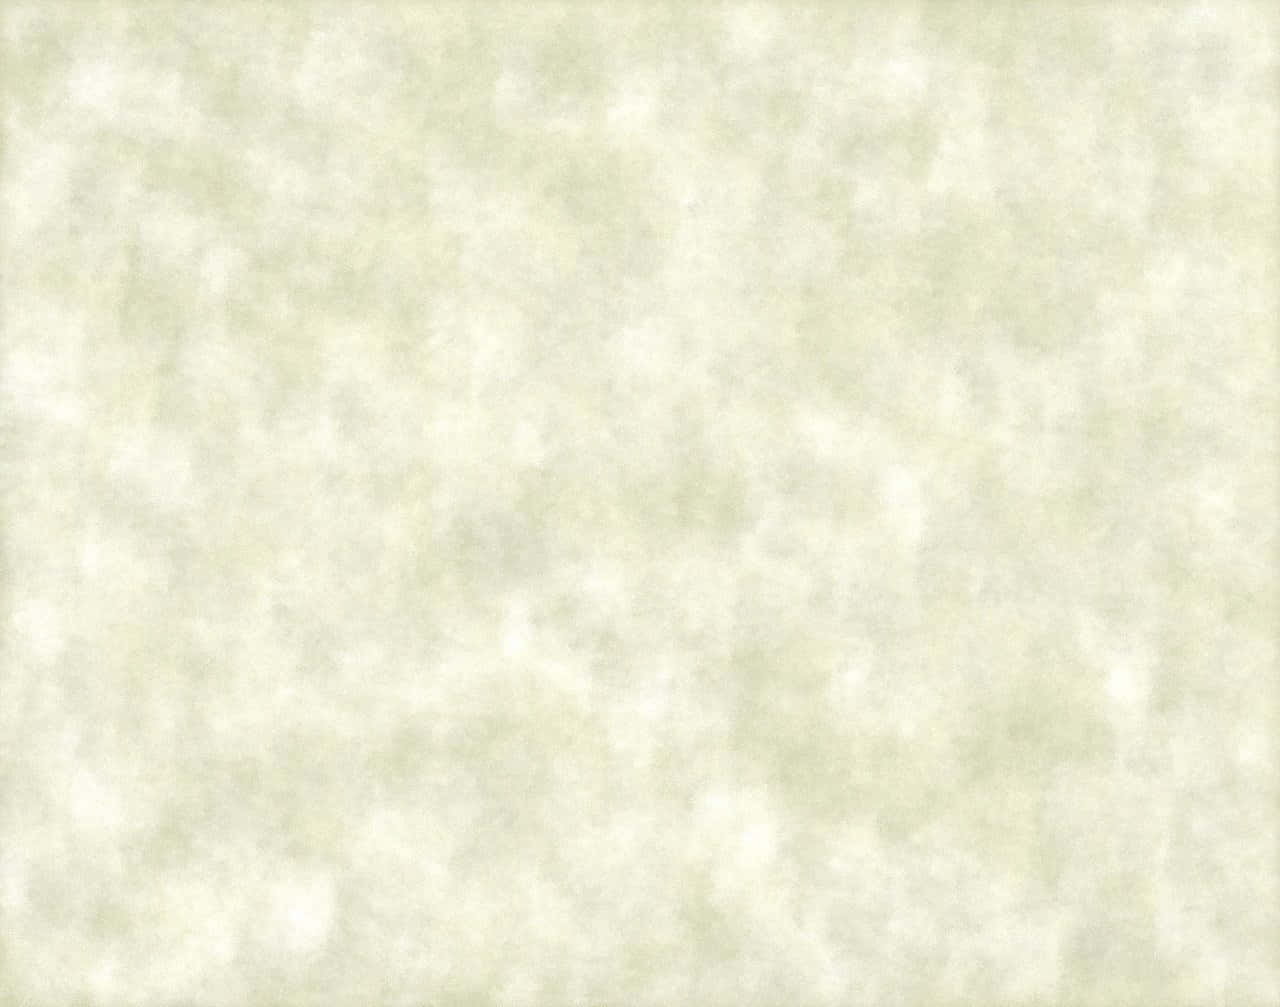 Parchment Paper Background - A great texture to add to your designs.